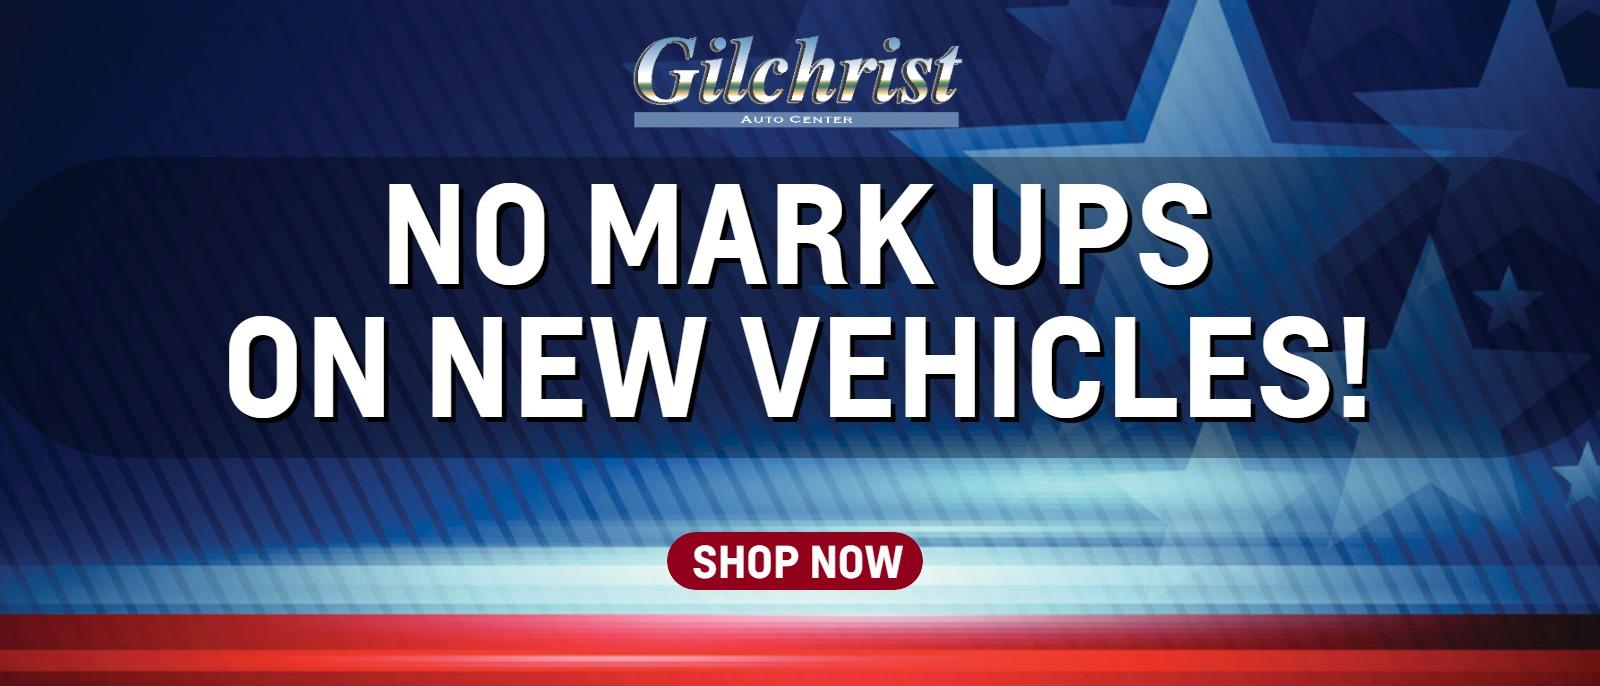 No Markups on New vehicles